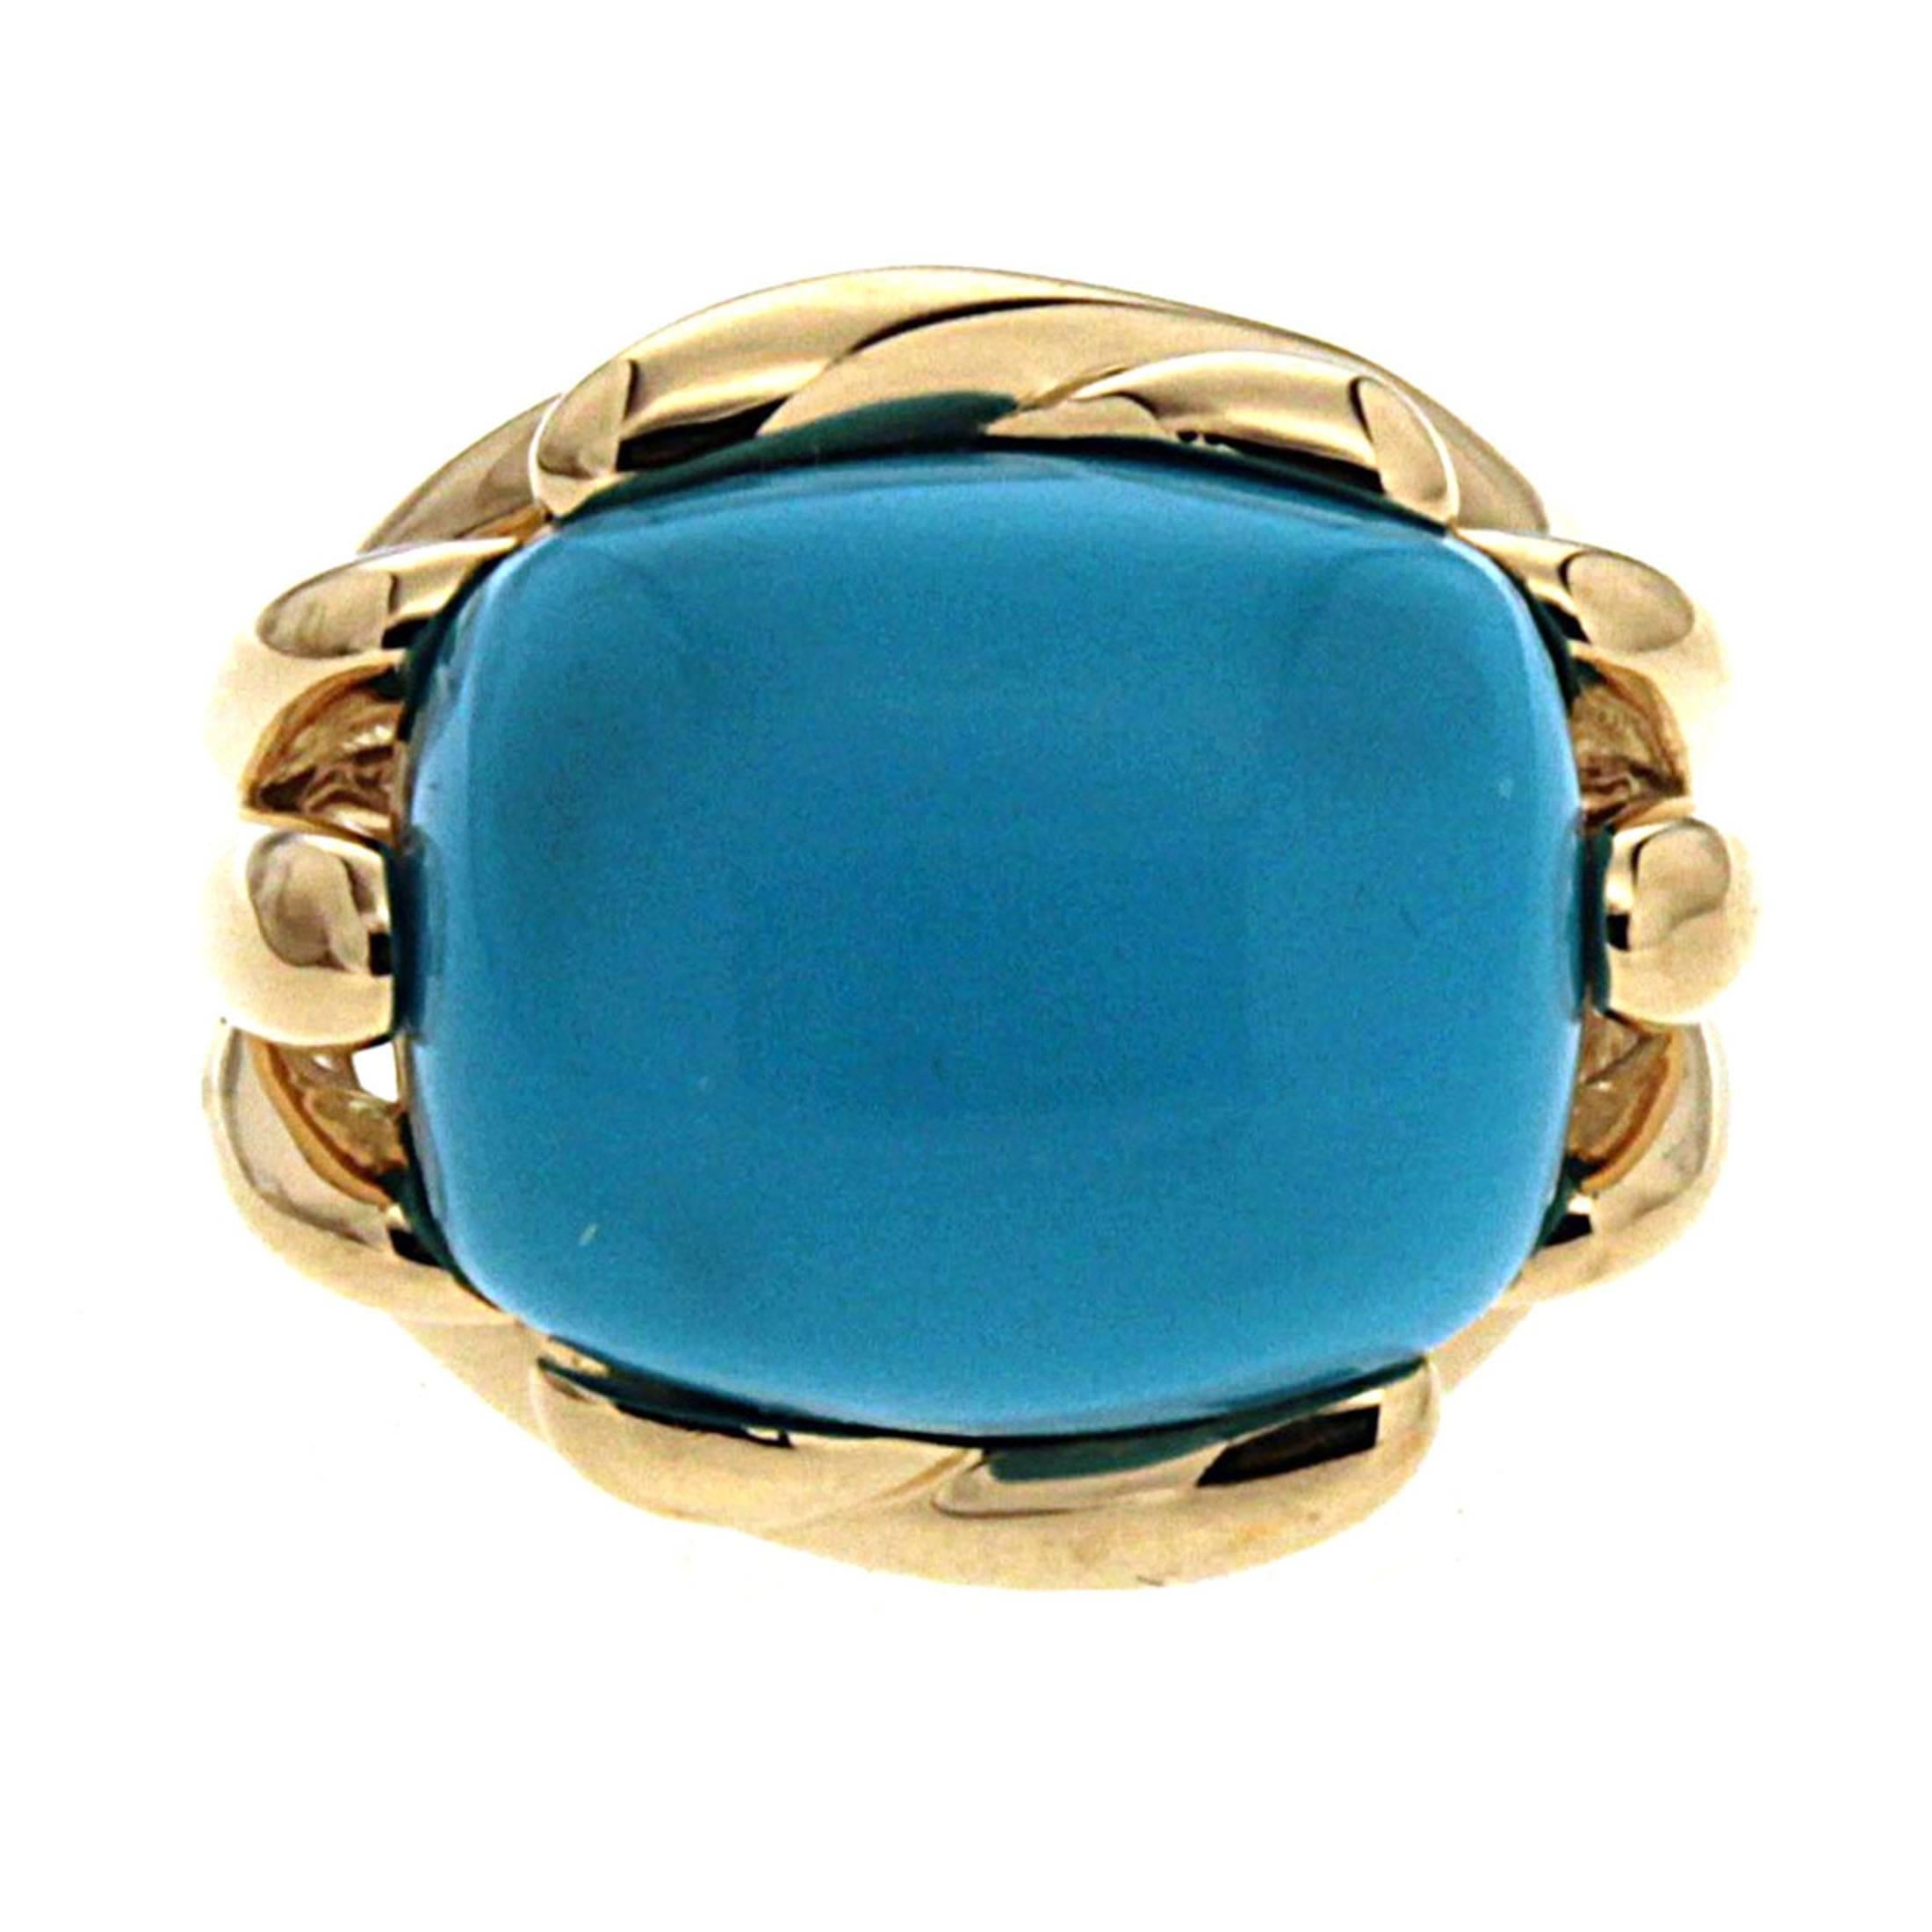 Valentin Magro Fluted Criss Cross Cushion Turquoise Sleeping Beauty Ring exhibits light blues. The turquoise is shaped into an elongated cushion and set sideways in the ring. The 18k yellow gold shank splits as it rises. Some pieces spread apart,